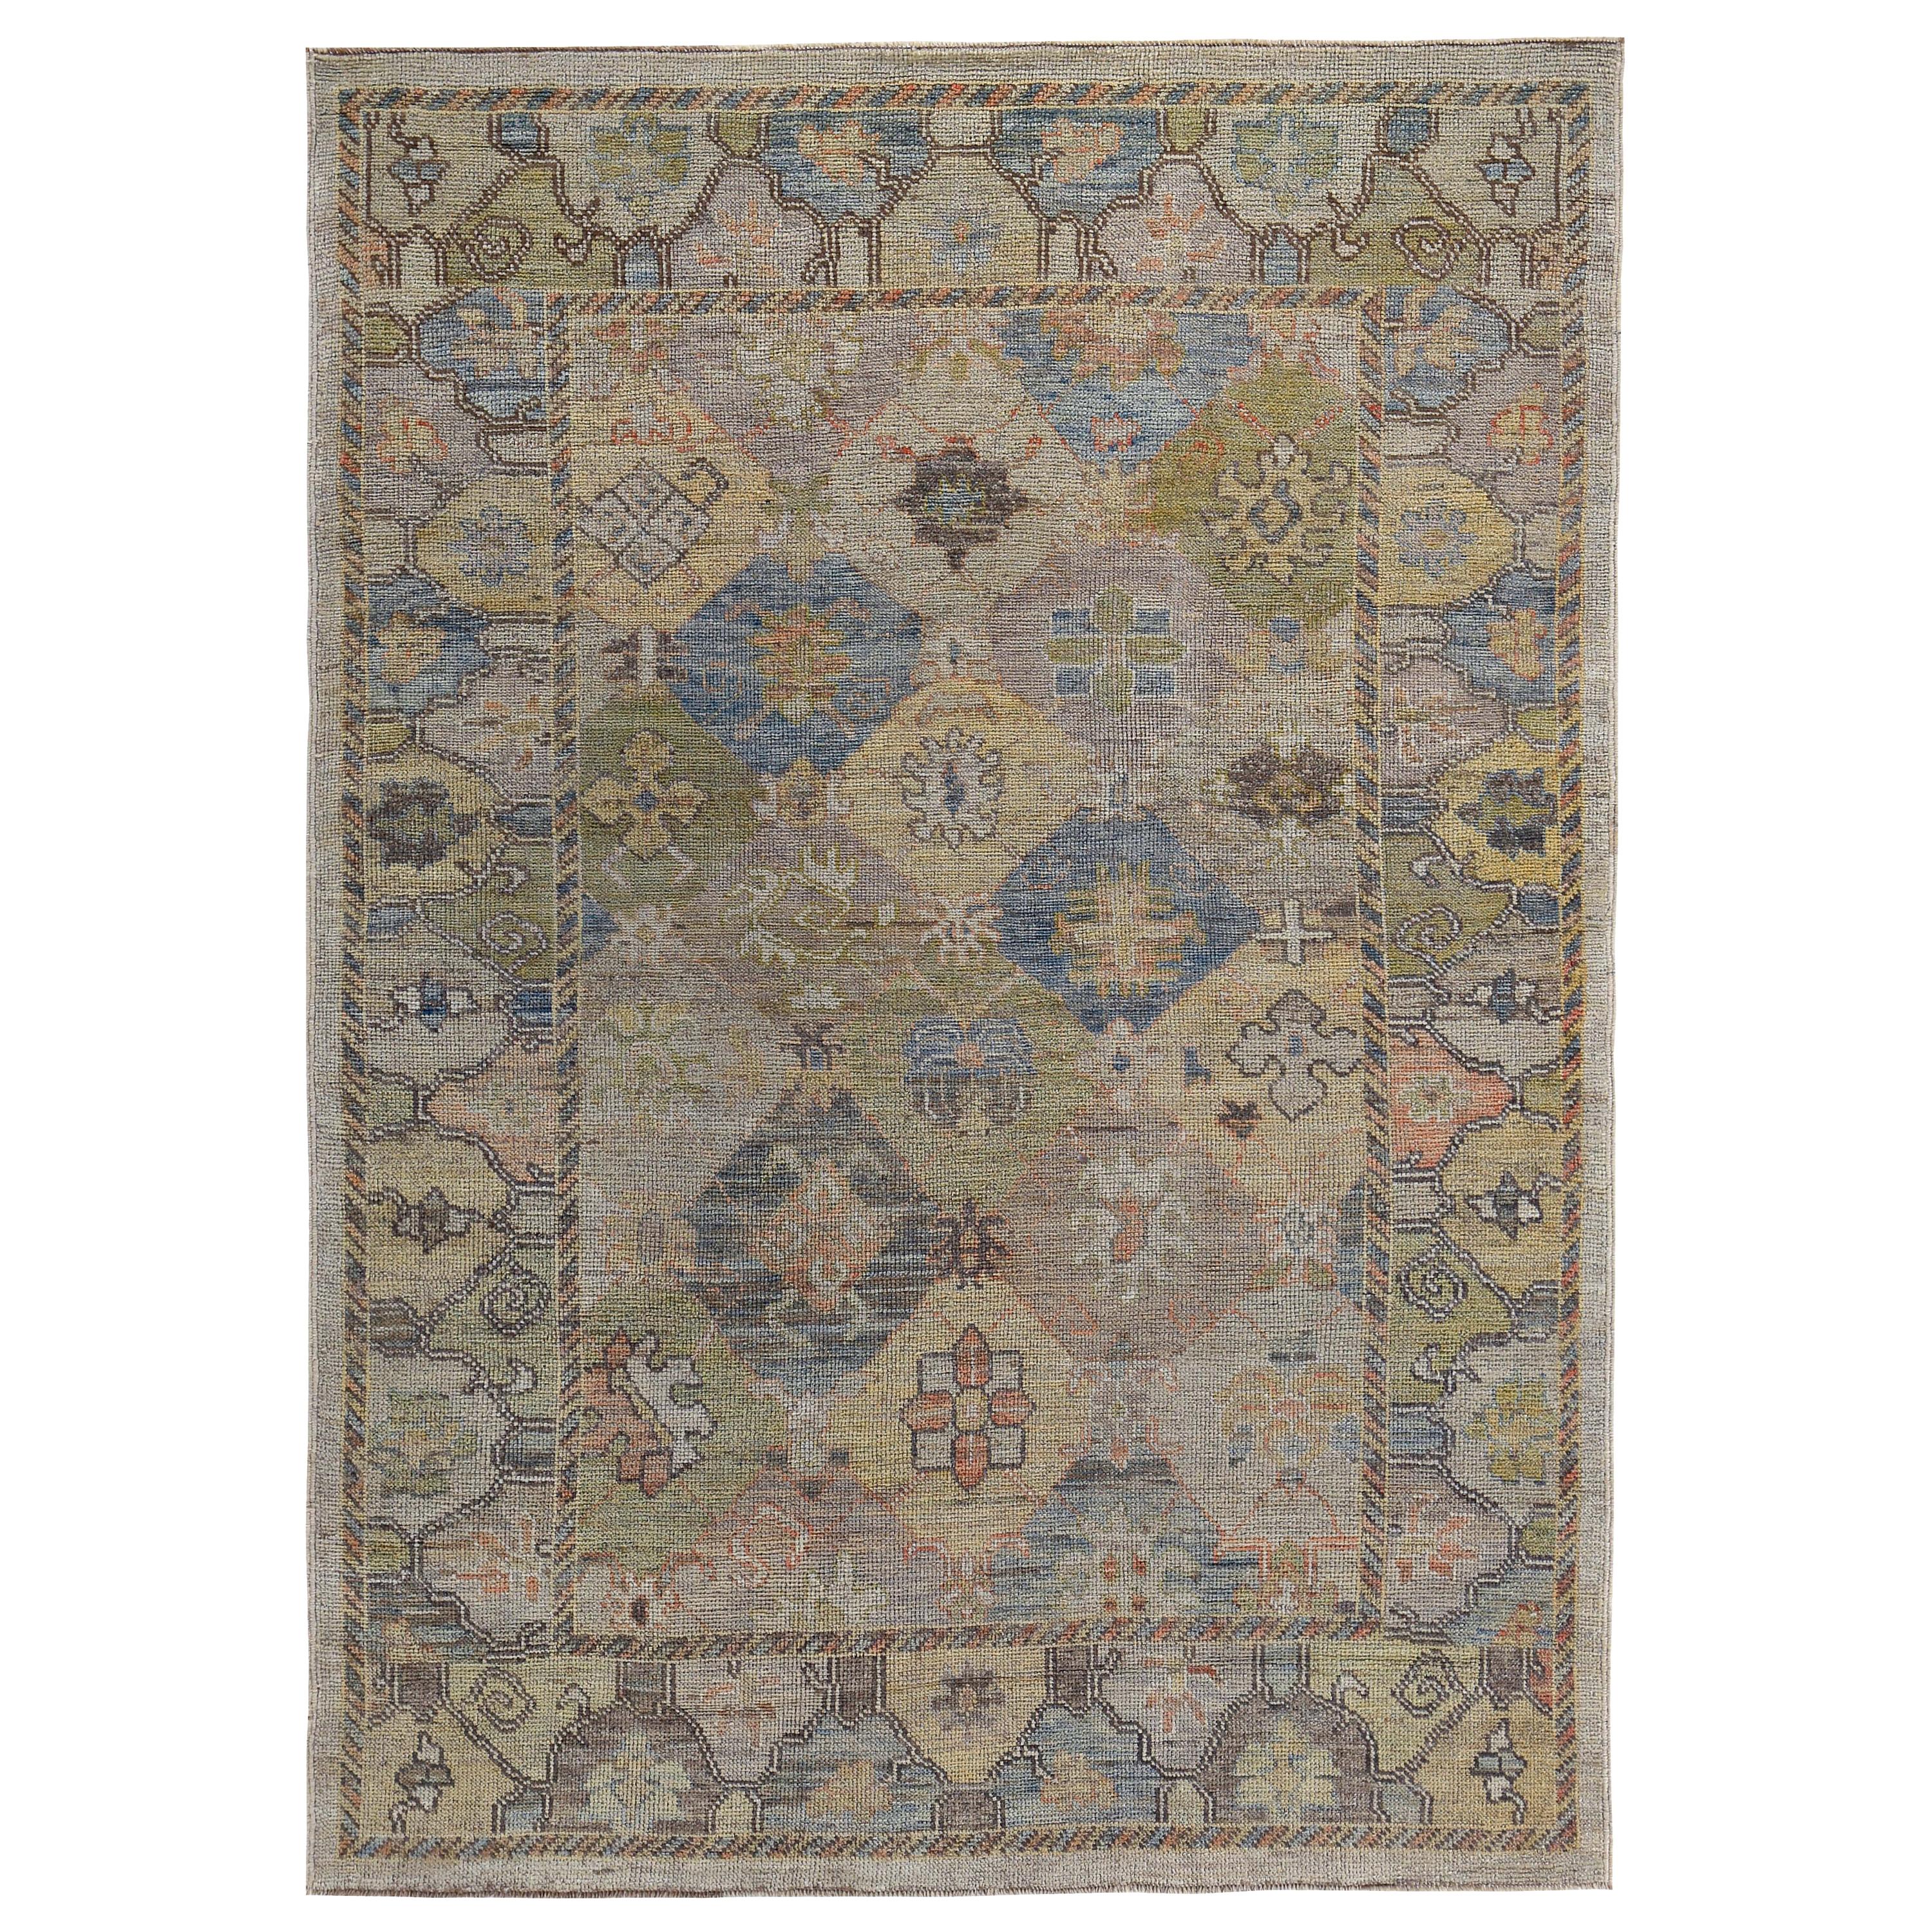 New Turkish Oushak Rug with Yellow, Blue and Green Floral Details on Beige Field For Sale